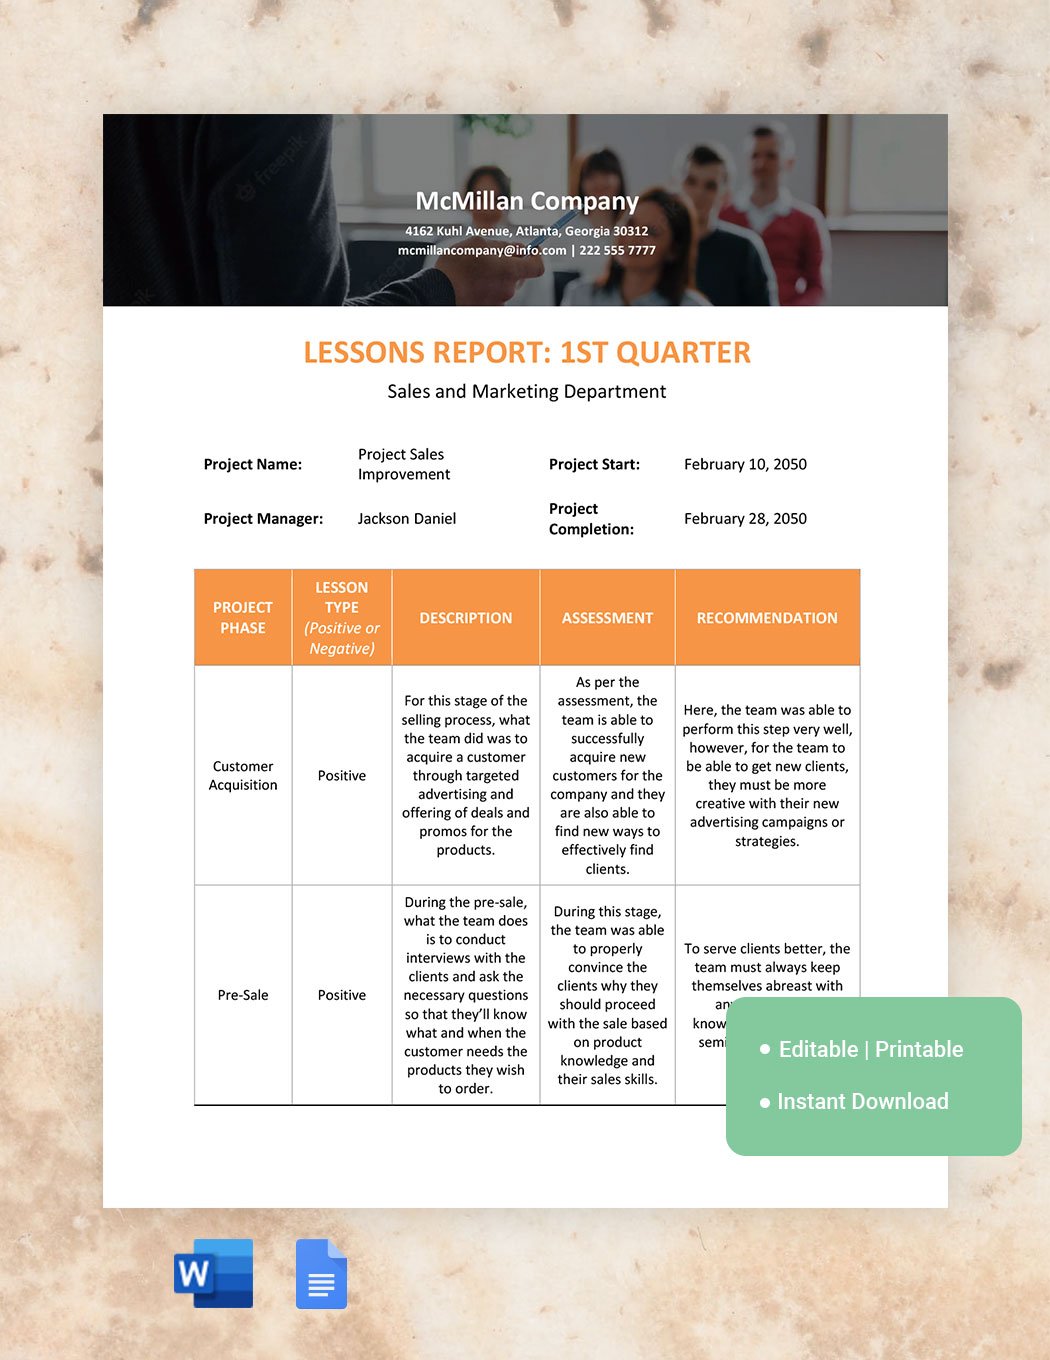 Incident Lessons Learned Template - Download in Word, Google Docs